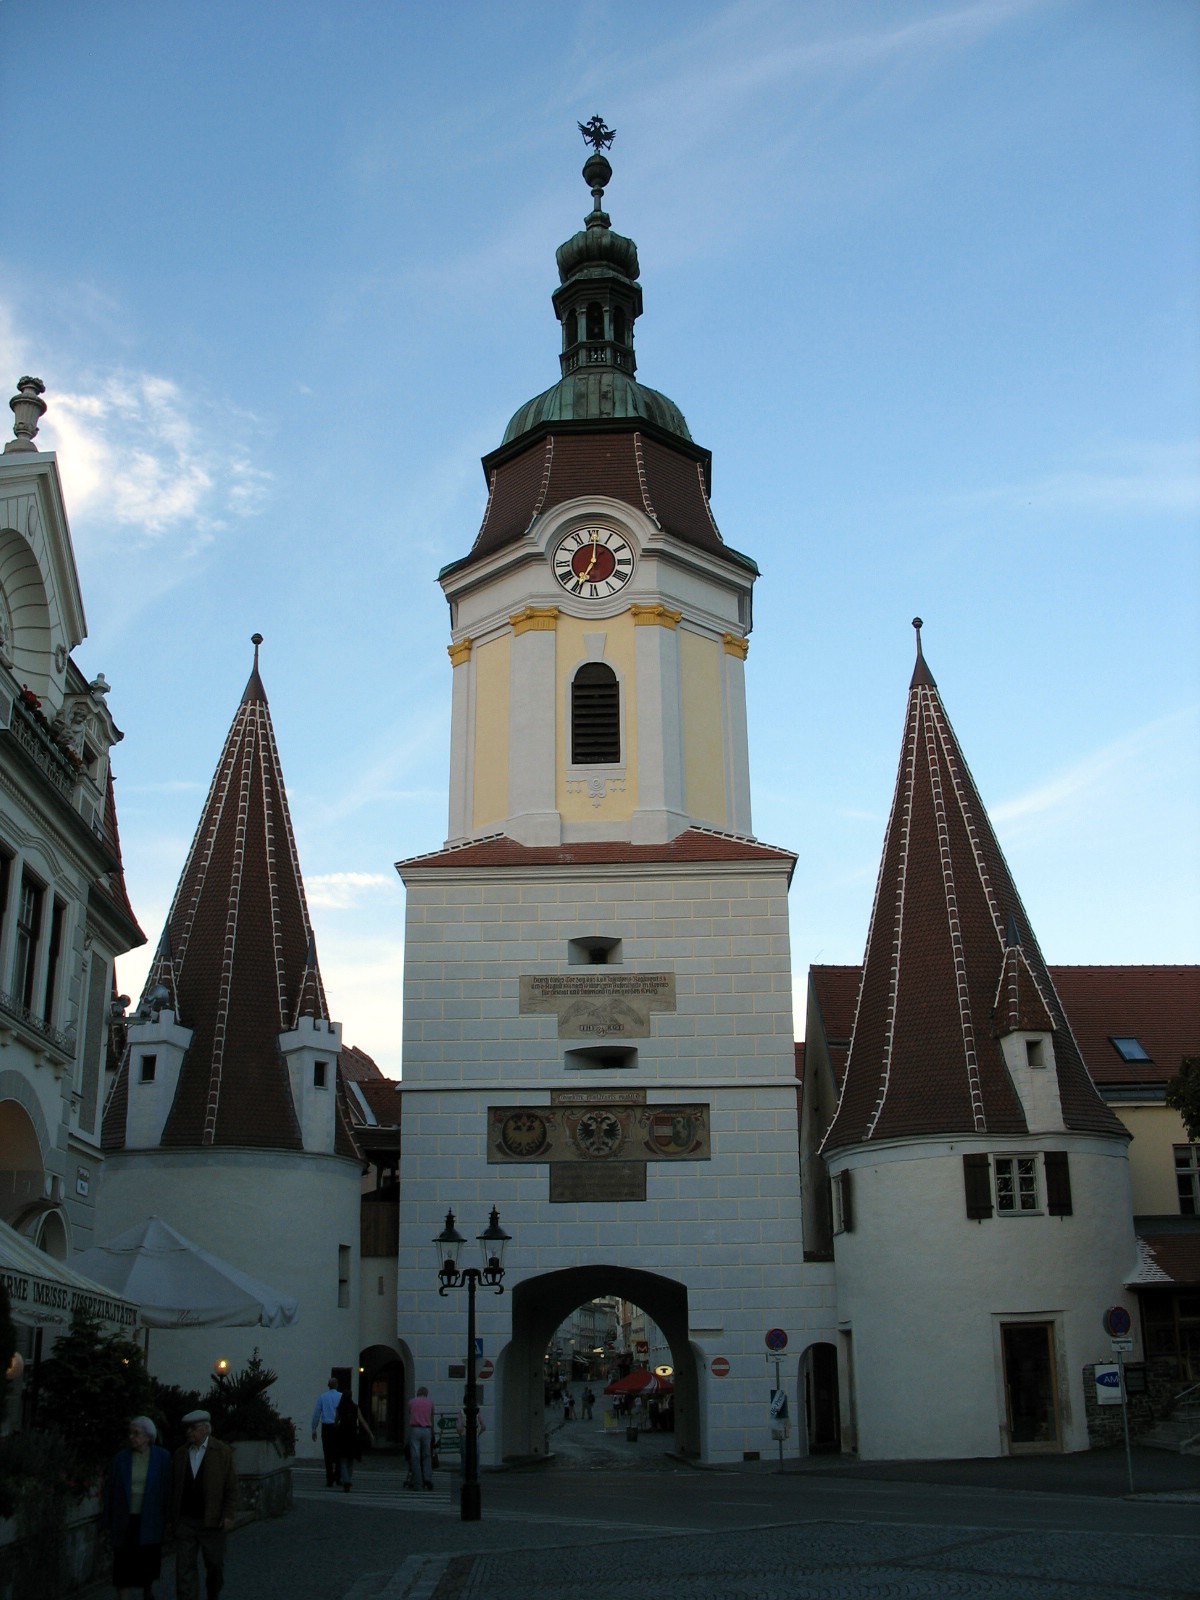 a large tower with two clocks is standing in front of many small buildings